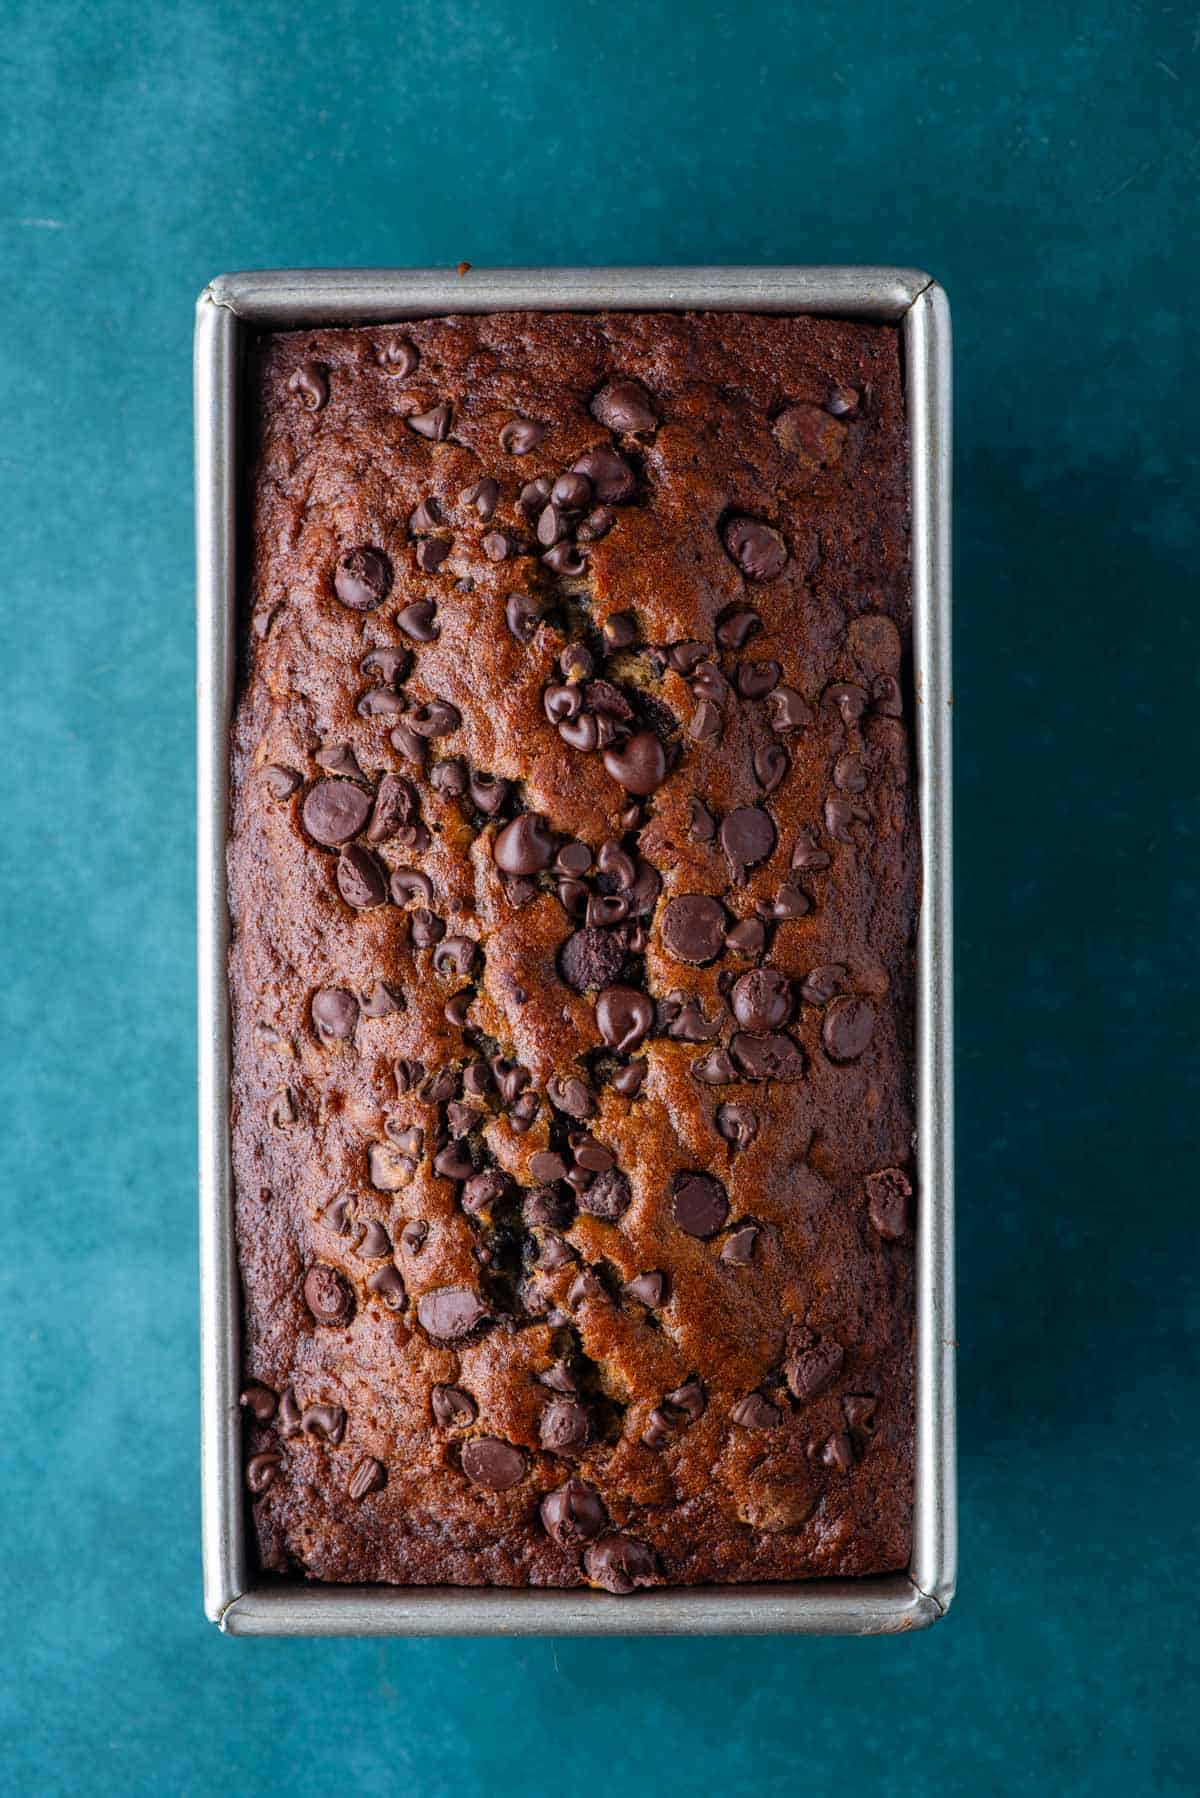 chocolate chip banana bread baking in a loaf pan sitting on a dark teal surface